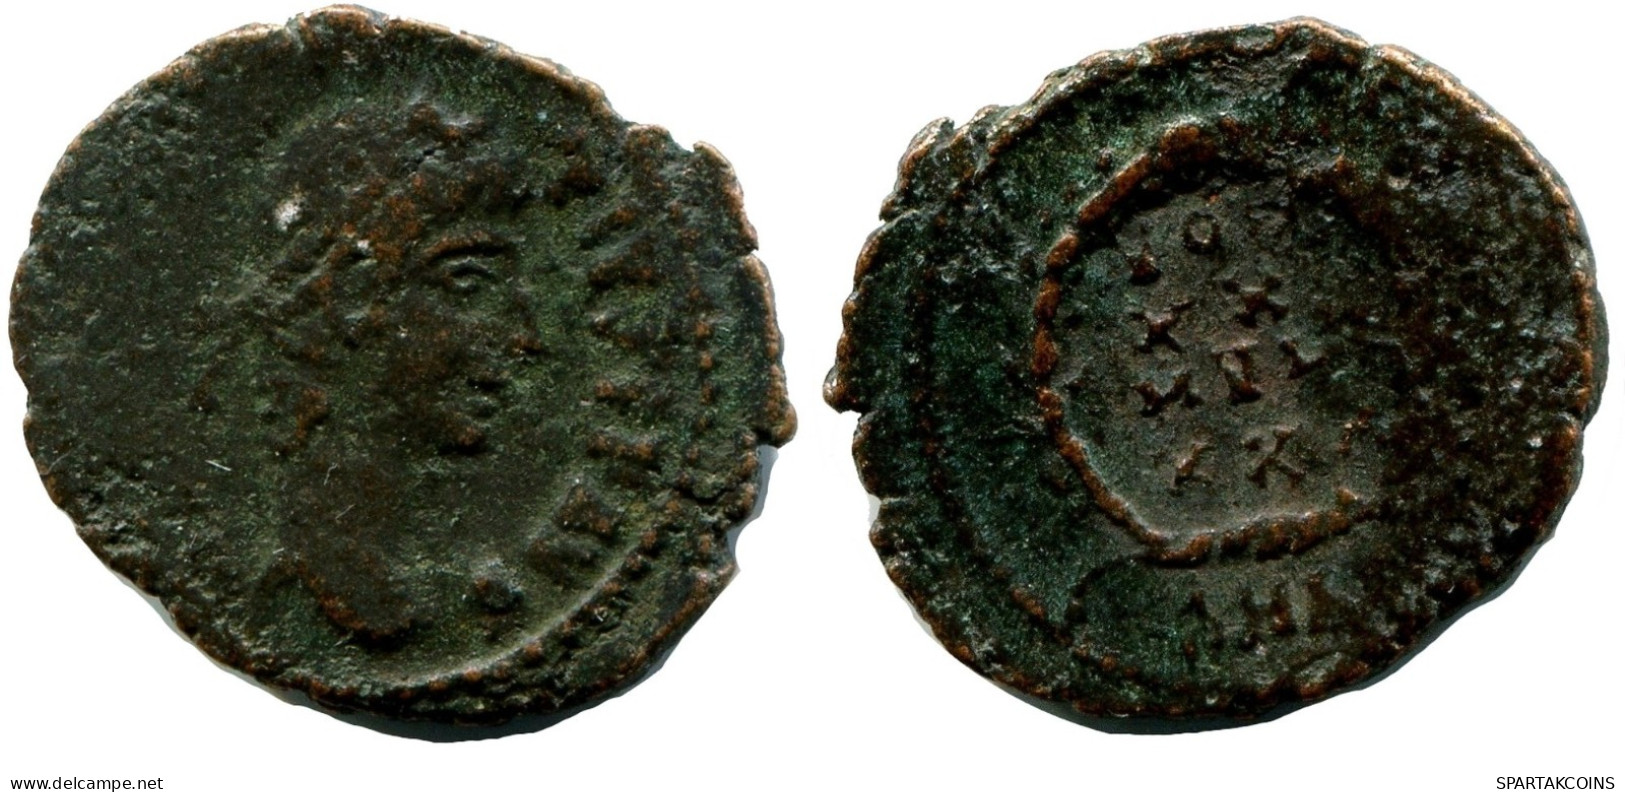 CONSTANTIUS II MINTED IN ANTIOCH FOUND IN IHNASYAH HOARD EGYPT #ANC11243.14.D.A - El Impero Christiano (307 / 363)